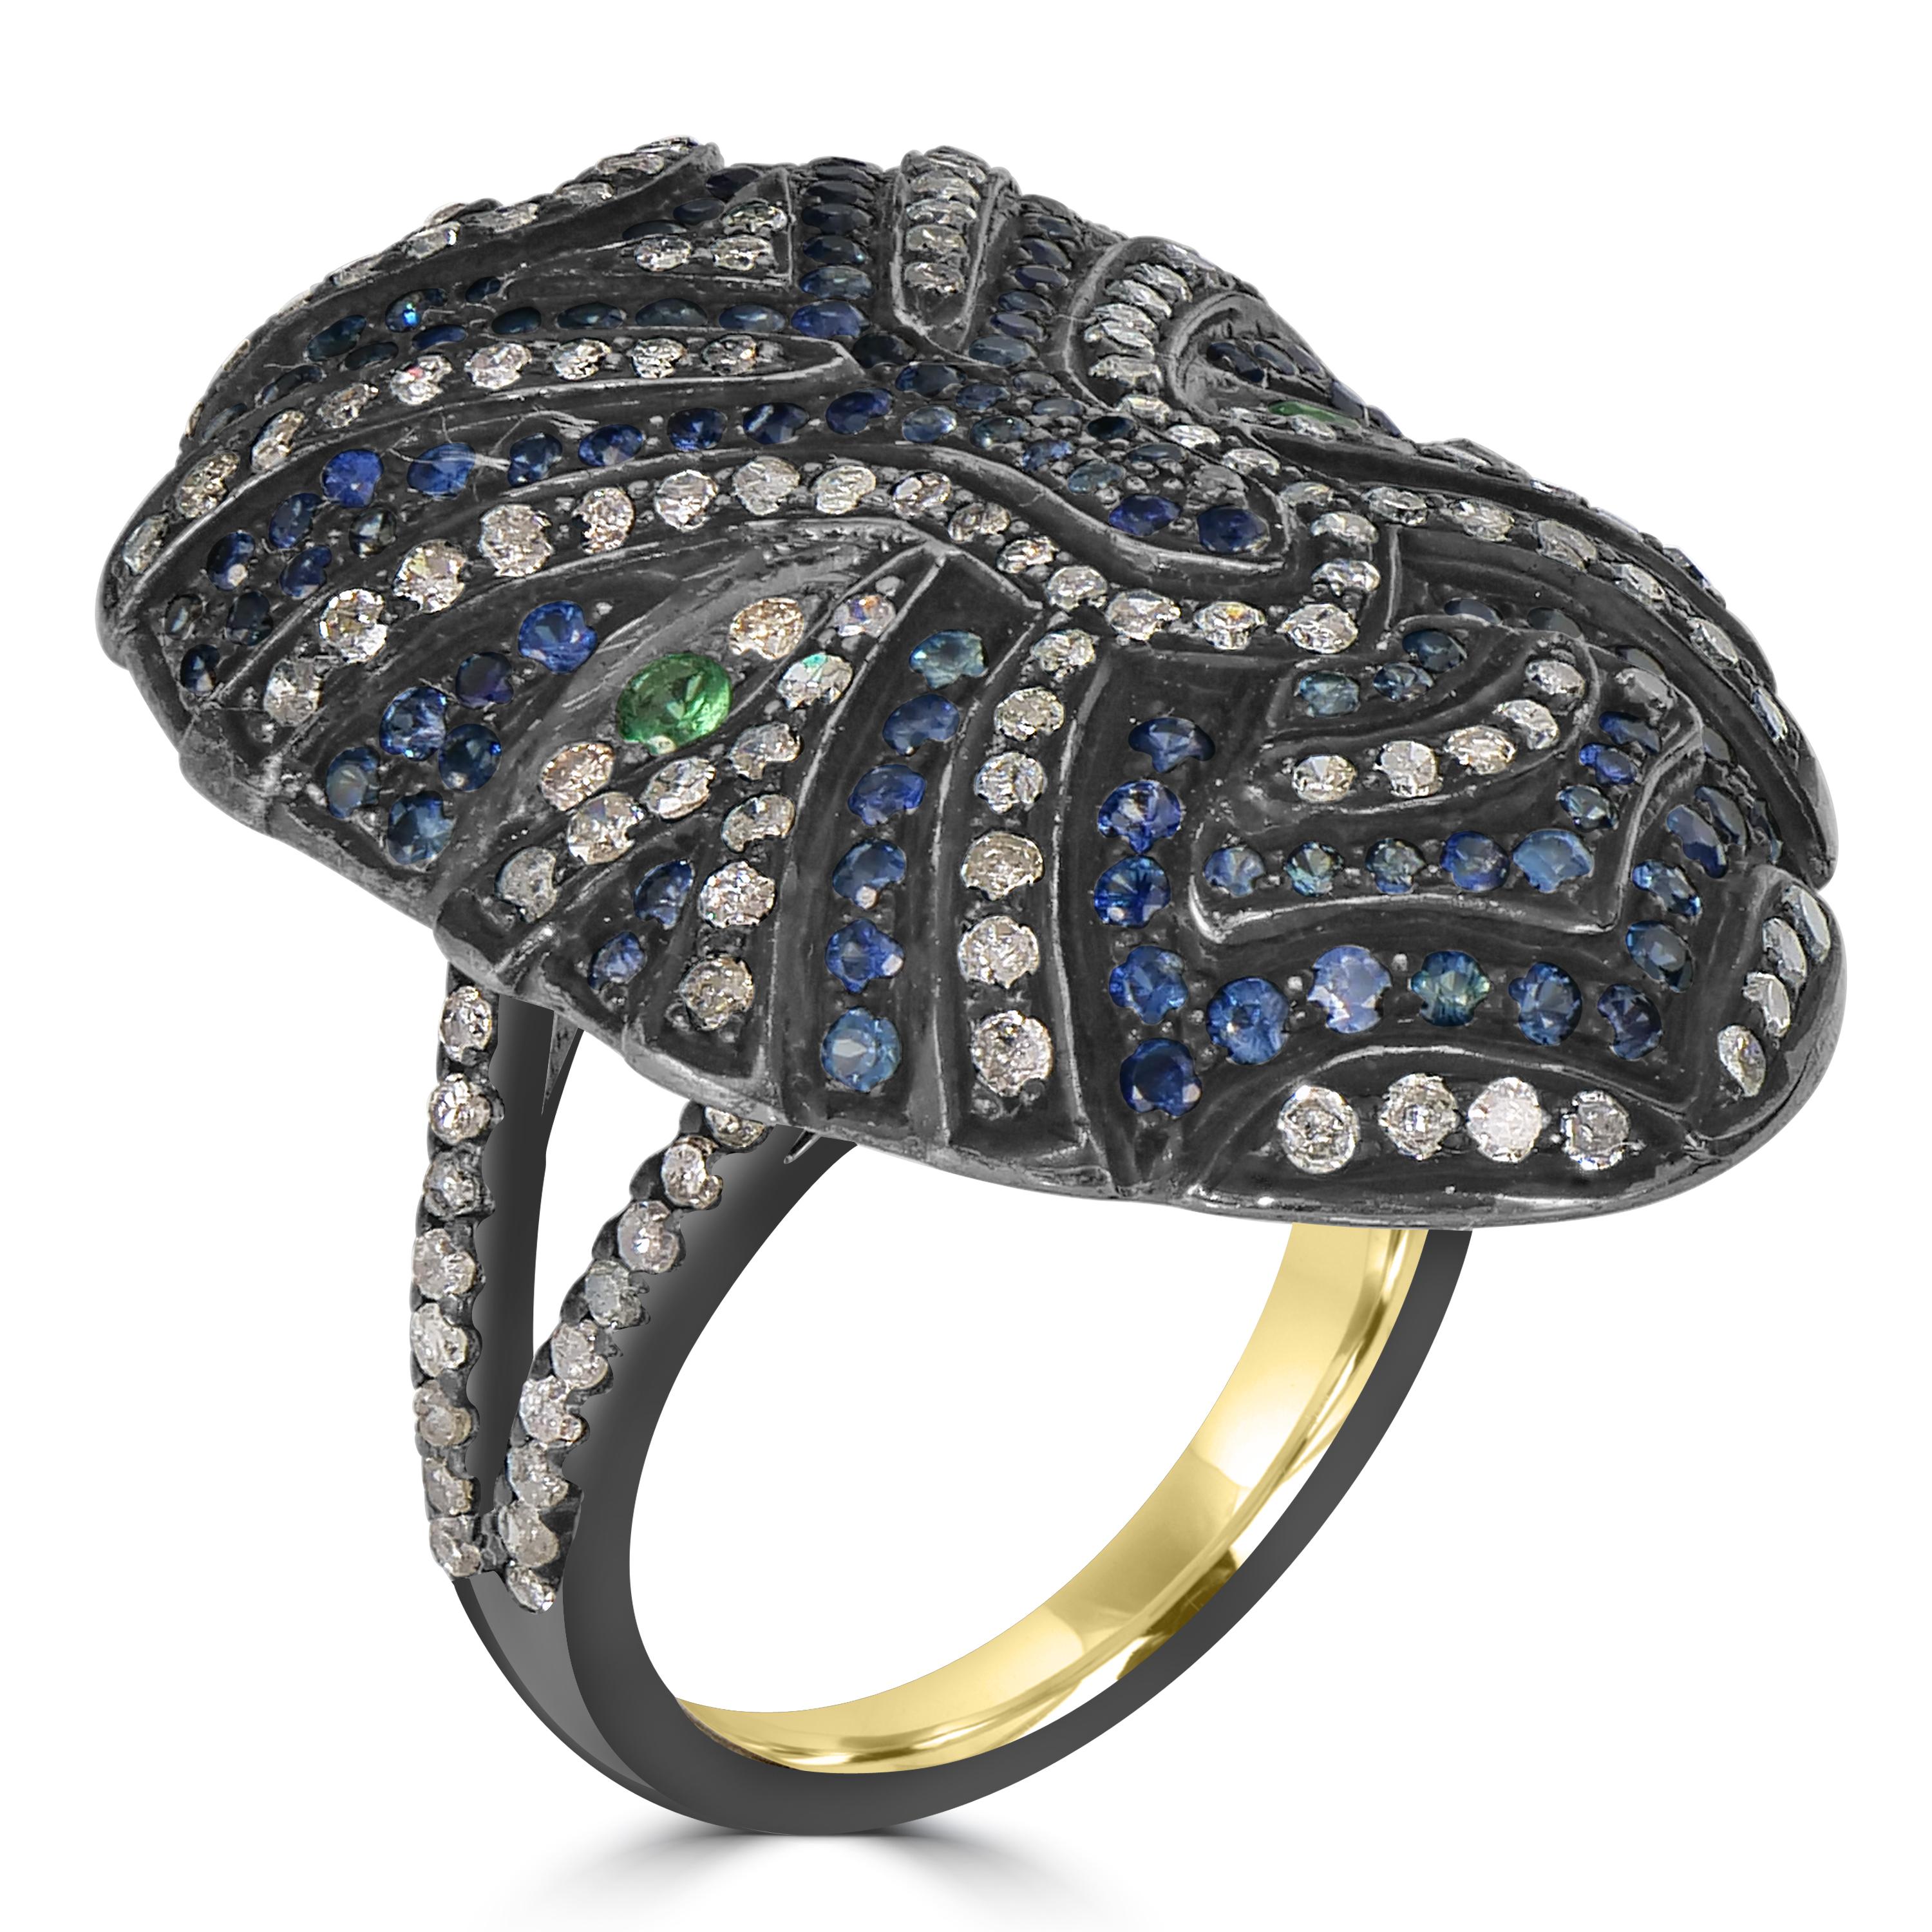 Dive into the mystique of the Victorian 3.3 Cttw. Blue Sapphire, Tsavorite, and Diamond Full Face Mask Ring — a captivating fusion of avant-garde design and opulent gemstones. Crafted in sterling silver with a black rhodium top, the ring head takes